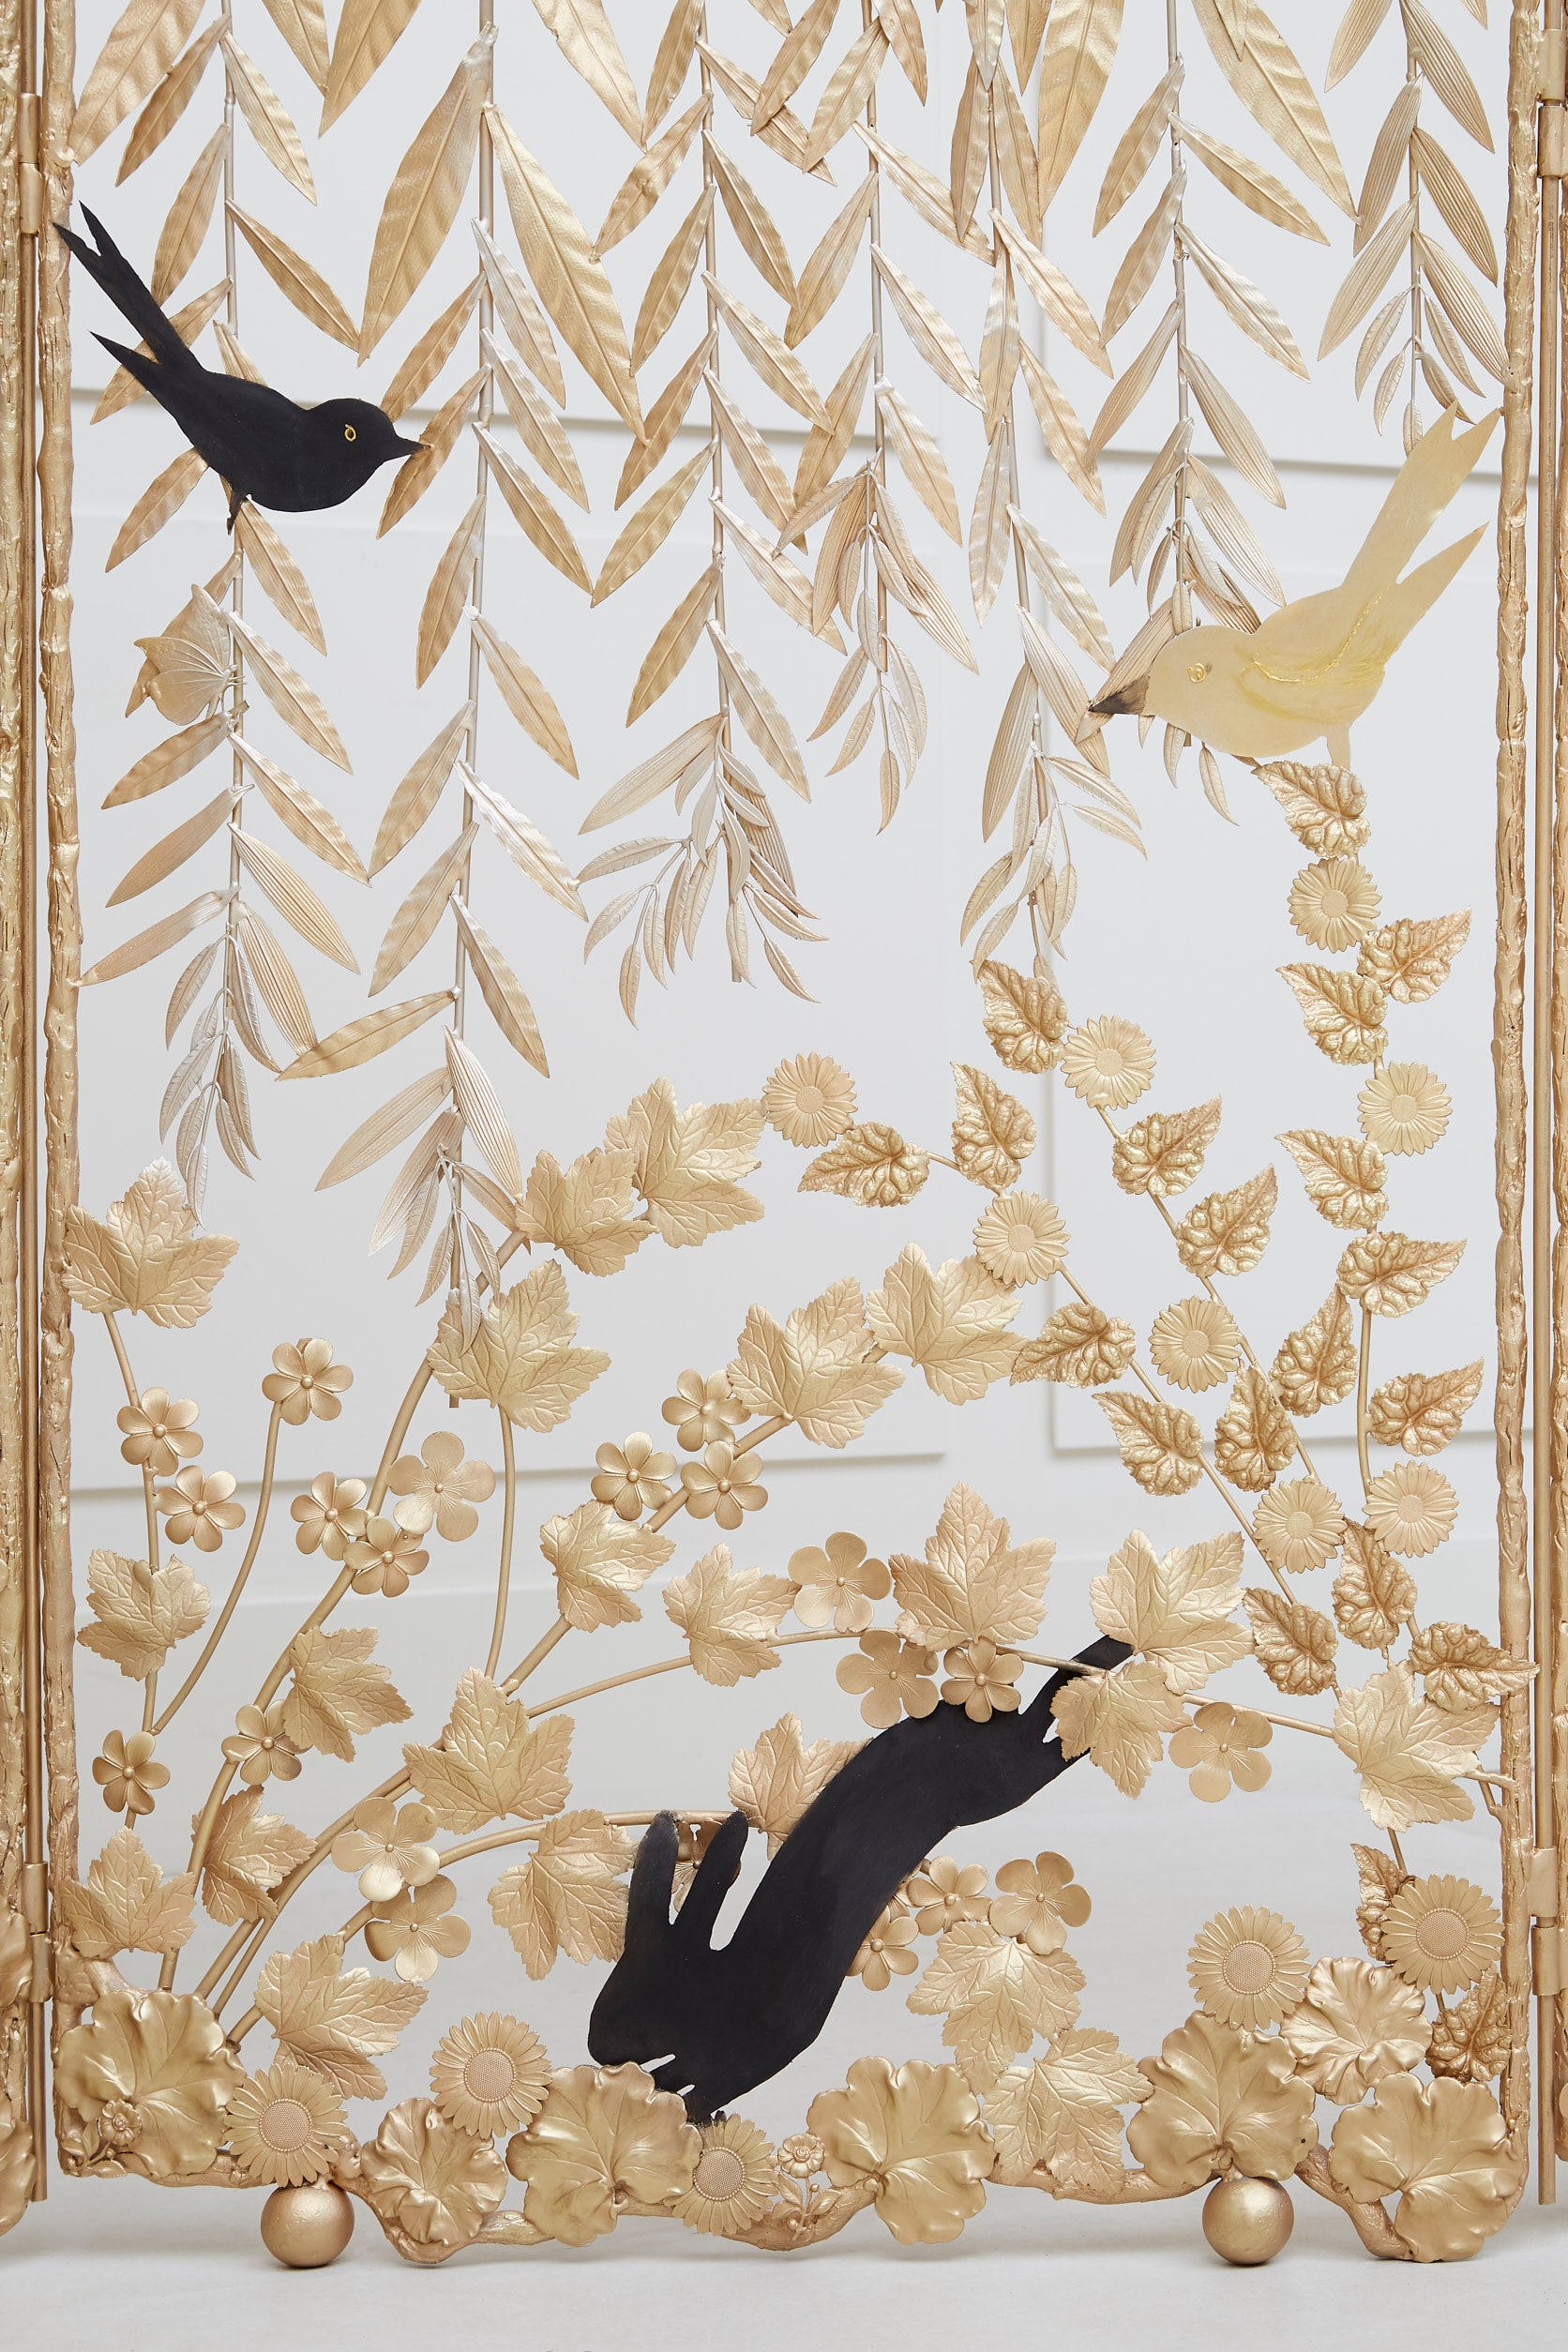 Joy de Rohan Chabot, “The weeping willow, black birds and rabbits”, vue 01